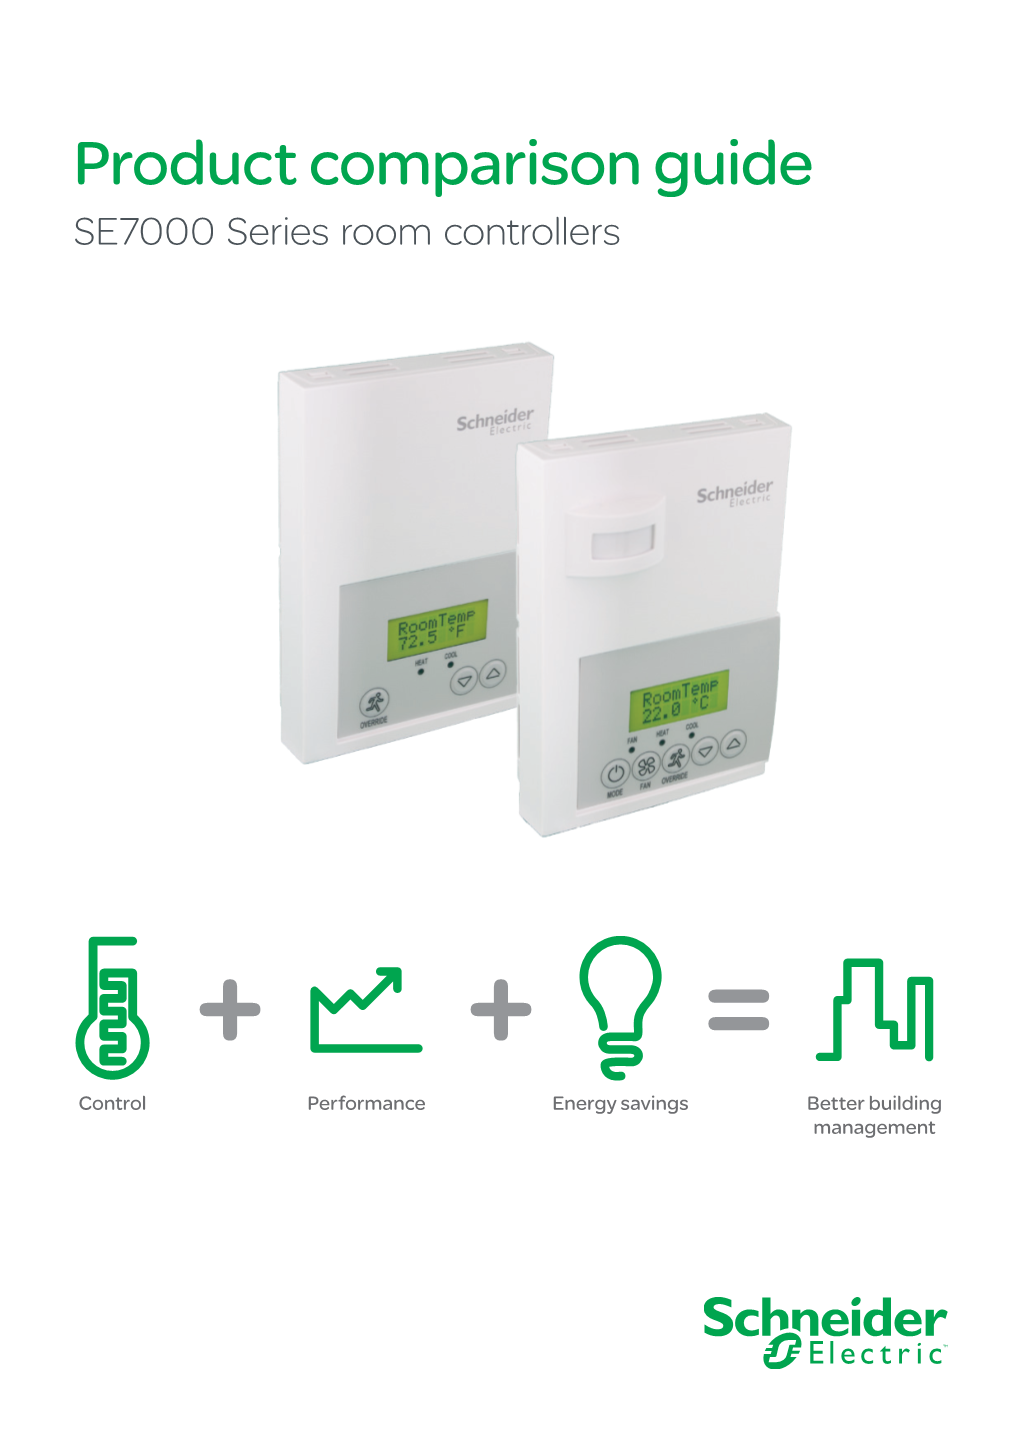 Product Comparison Guide SE7000 Series Room Controllers